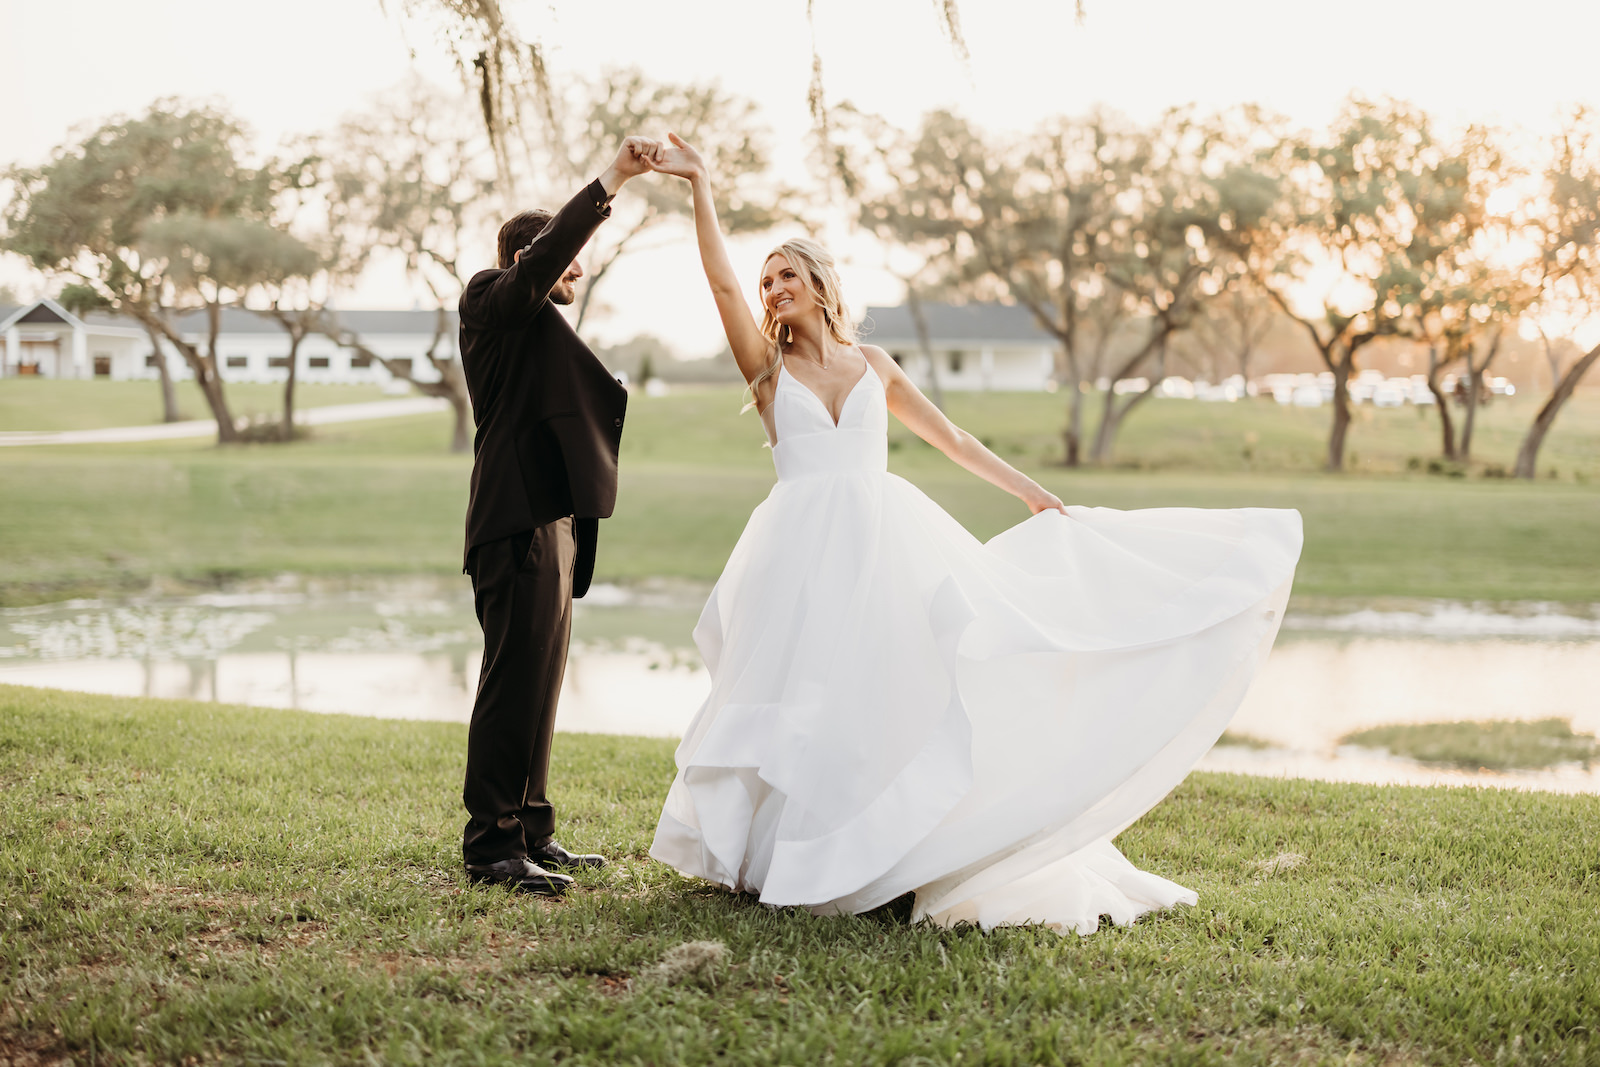 Tampa Groom Spinning Bride During Outdoor Sunset Wedding Photo